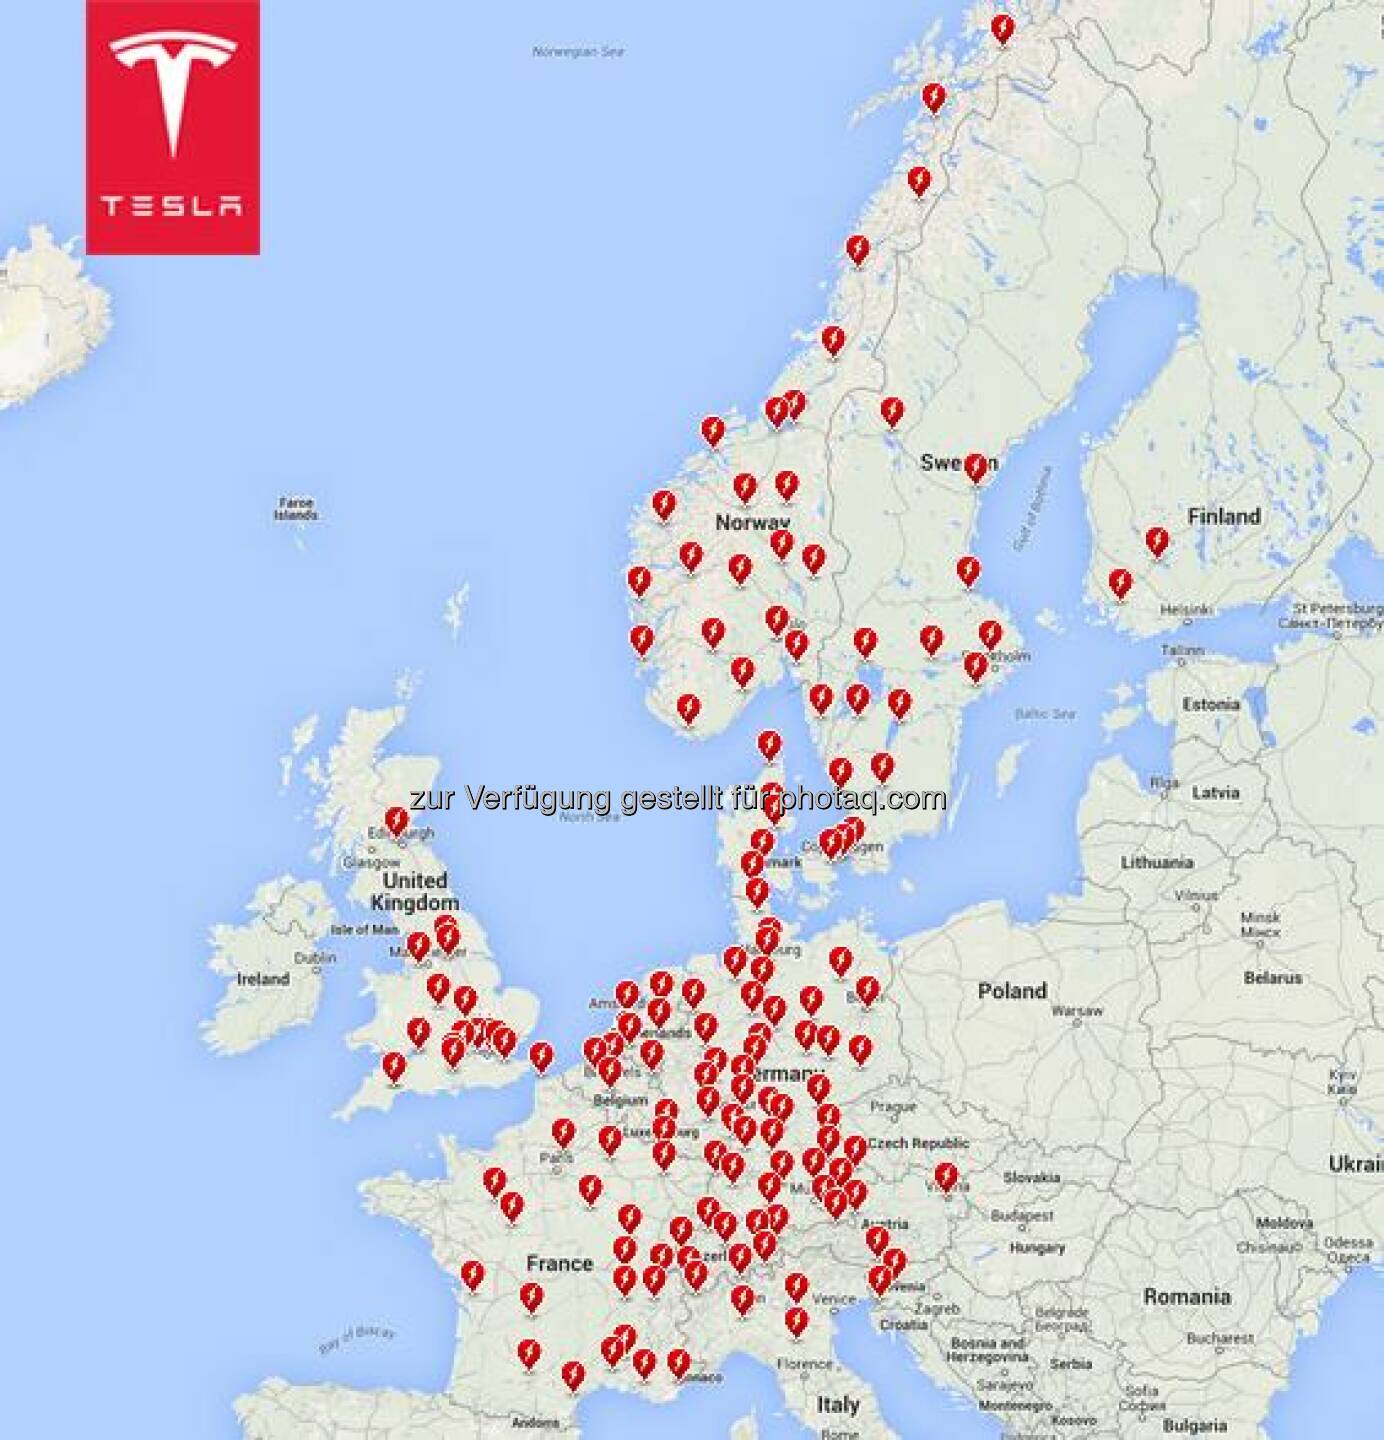 Supercharger Status: now 153 Supercharger Stations in Europe. 

Did you know…. Over the last year the network has grown by 10x, from 14 stations in April 2014 to over 140 stations in April 2015.  Source: http://facebook.com/teslamotors